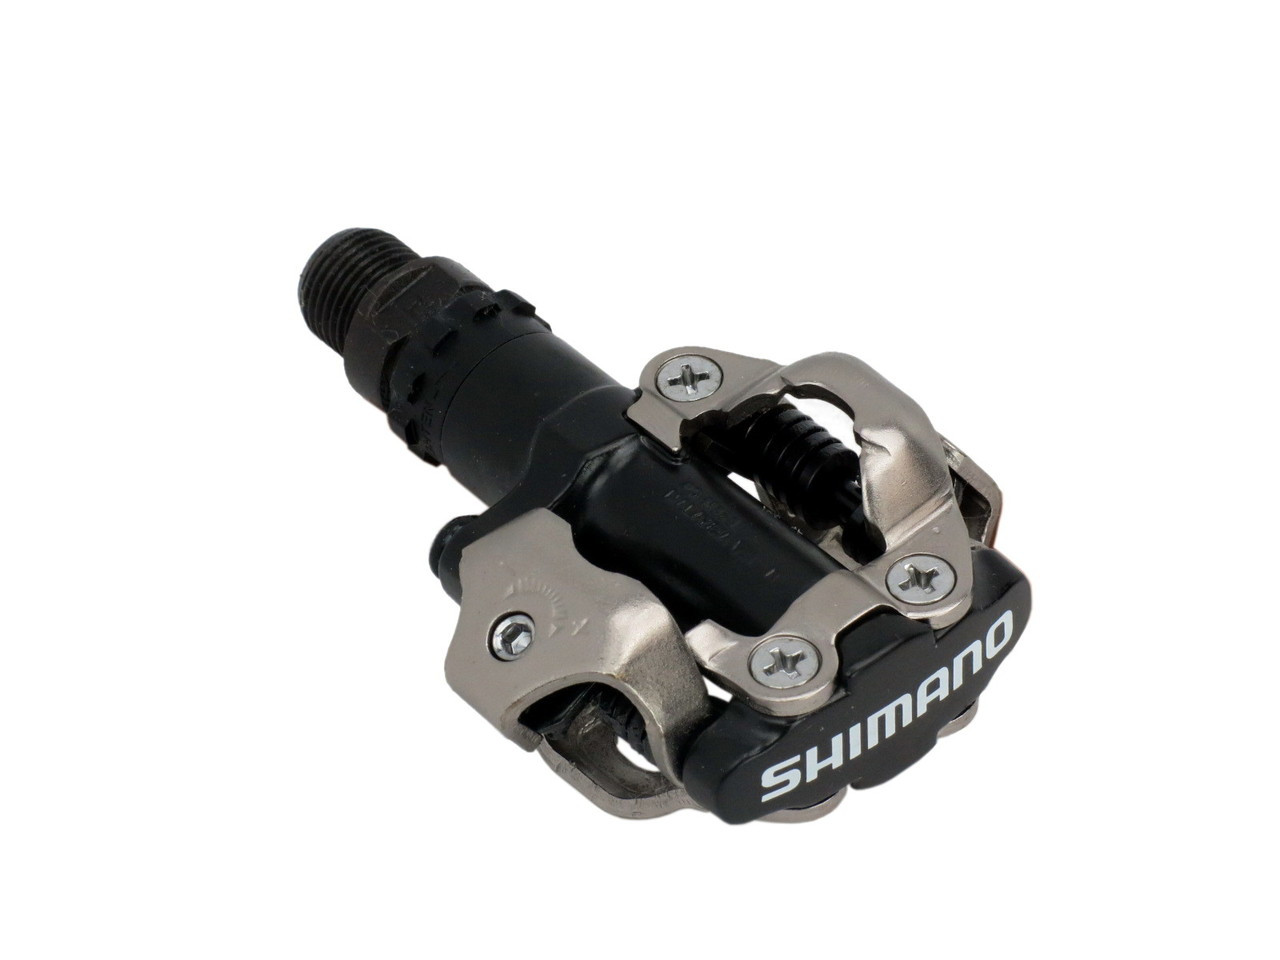 IJver coupon douche Shimano PD-M520 Pedals Black - BikeShoes.com - Free 3 day shipping on  orders over $50